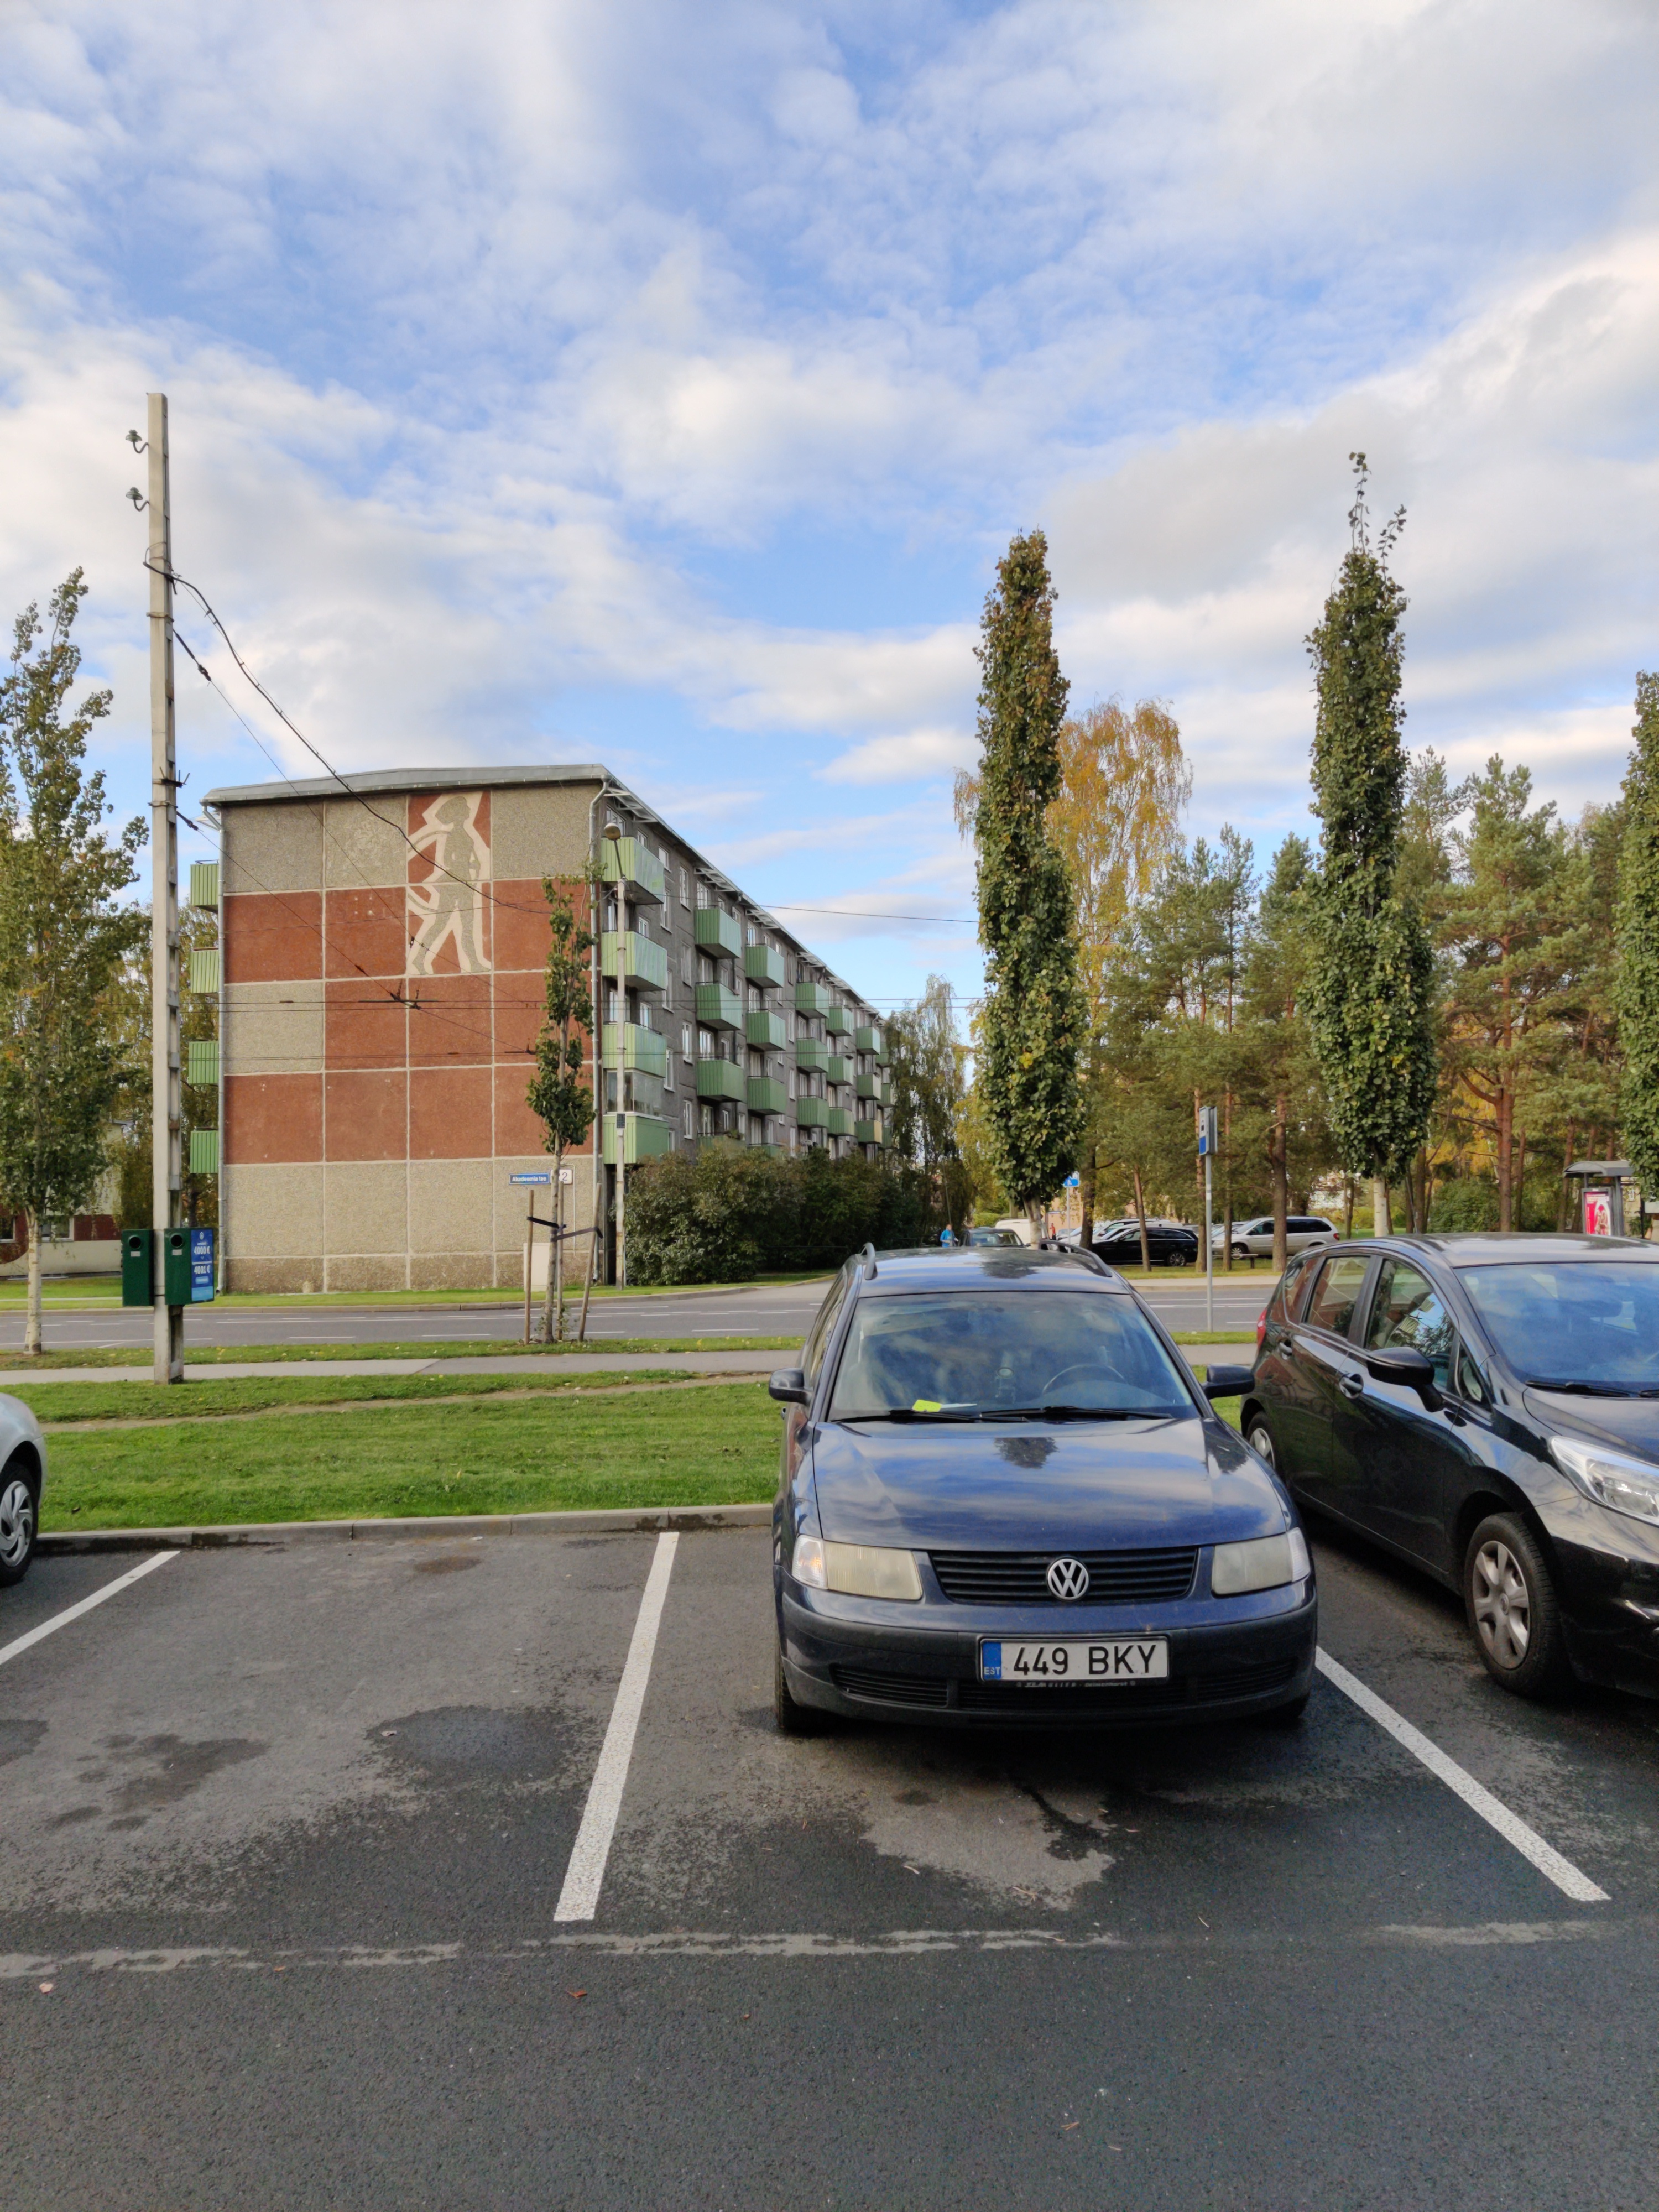 View of the apartments in Mustamäe. rephoto